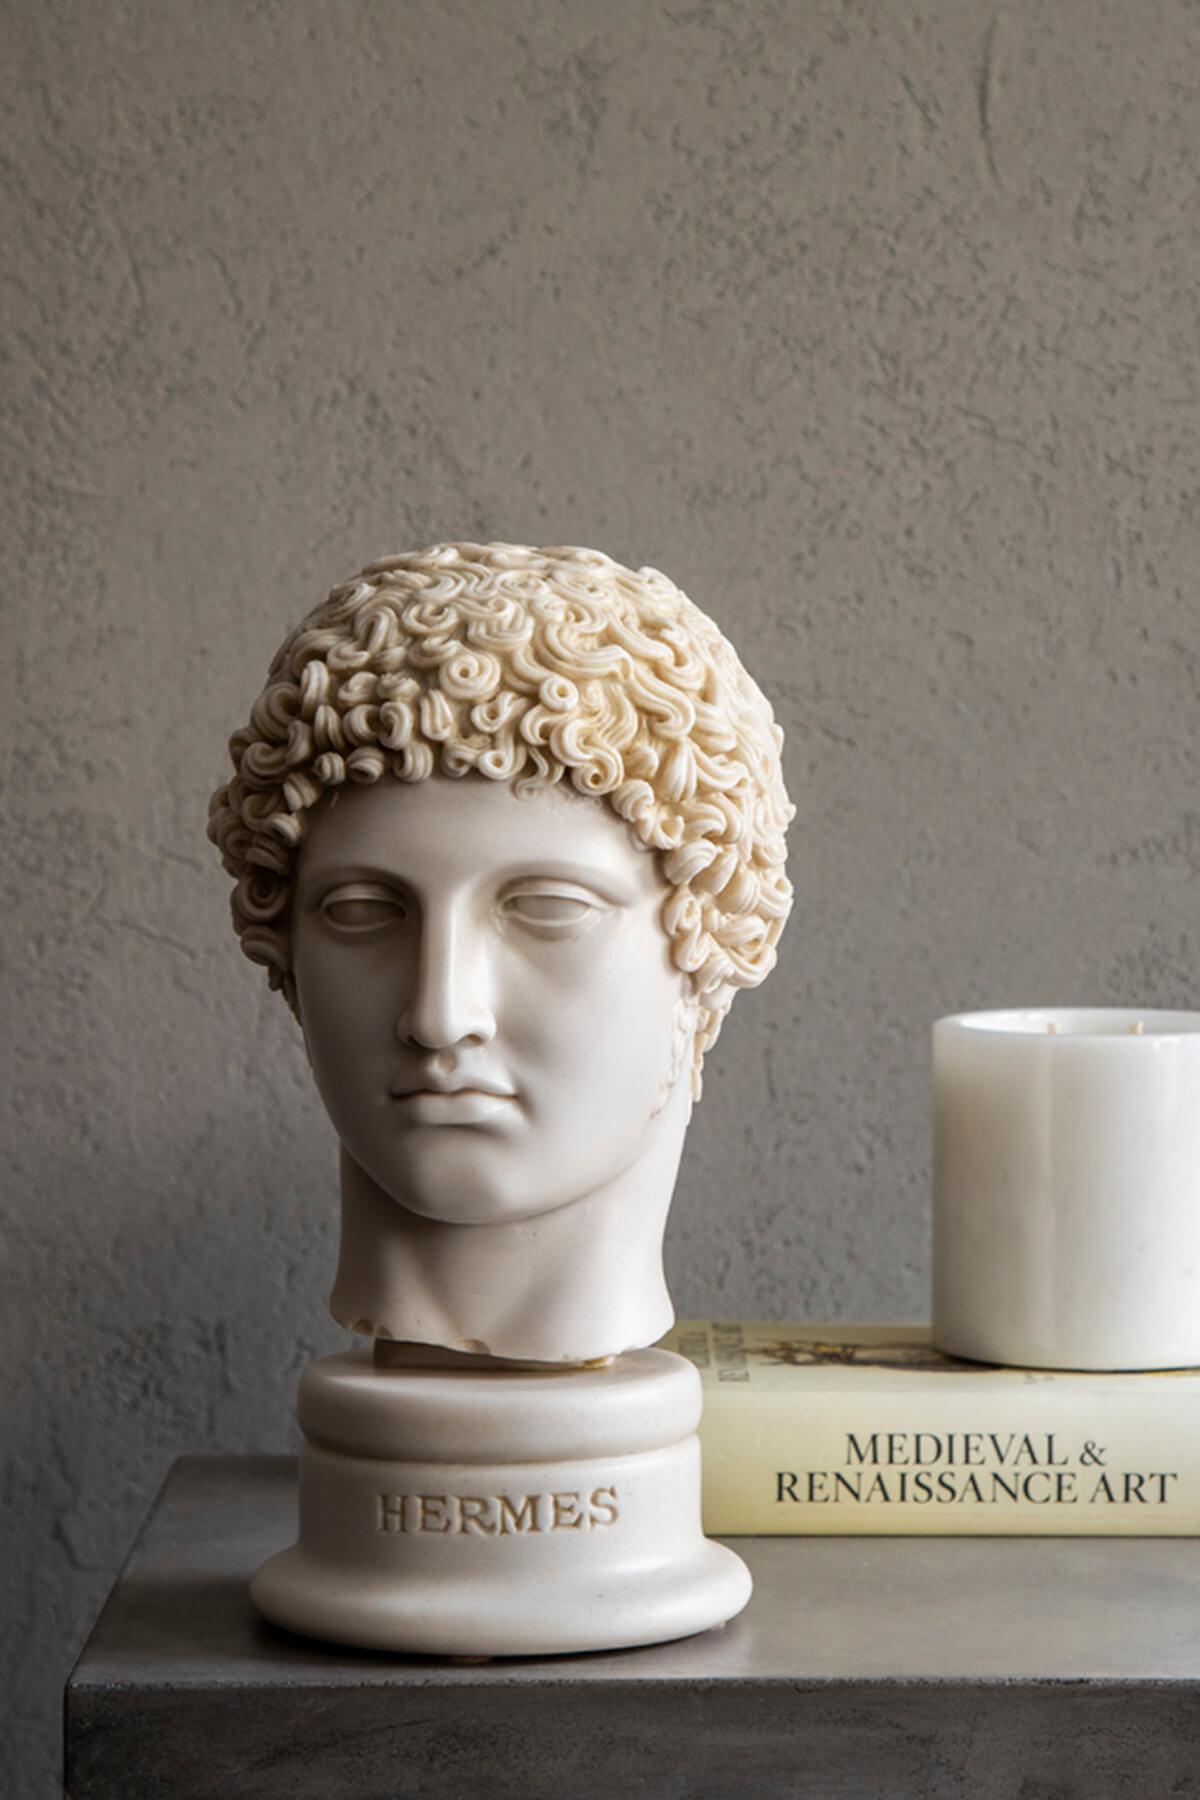 Cast Hermes Bust Made with Compressed Marble Powder, 'Side Museum' No:3